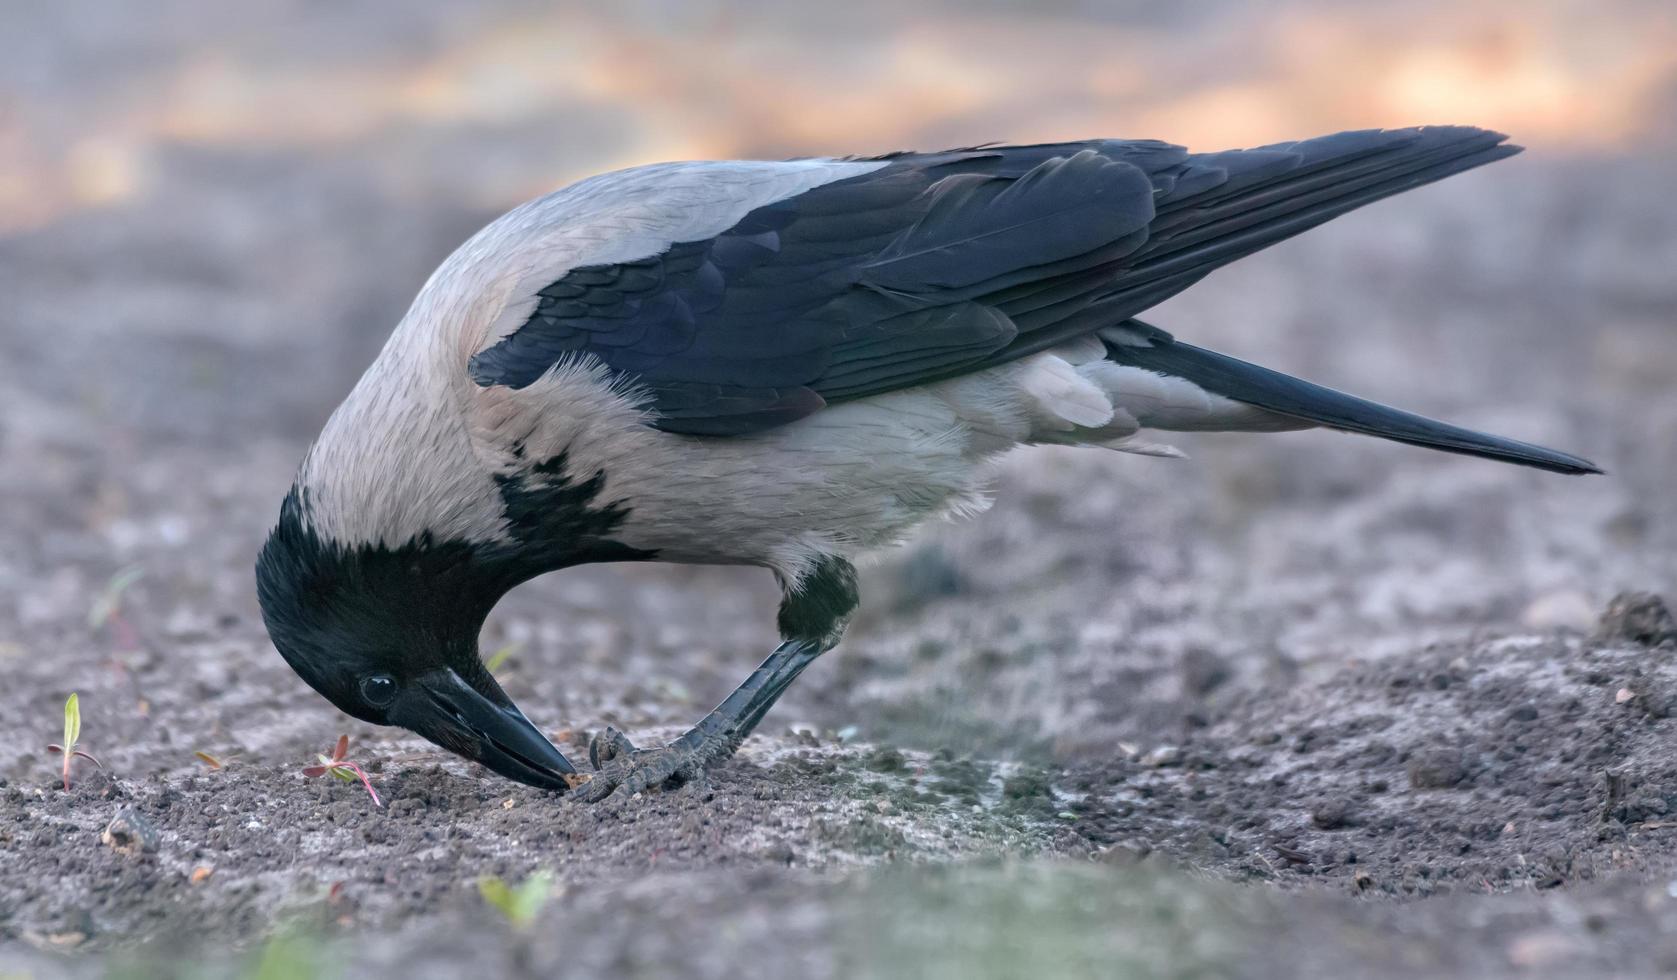 Hooded crow - Corvus cornix - feeds with beak and feet on muddy ground in early spring photo